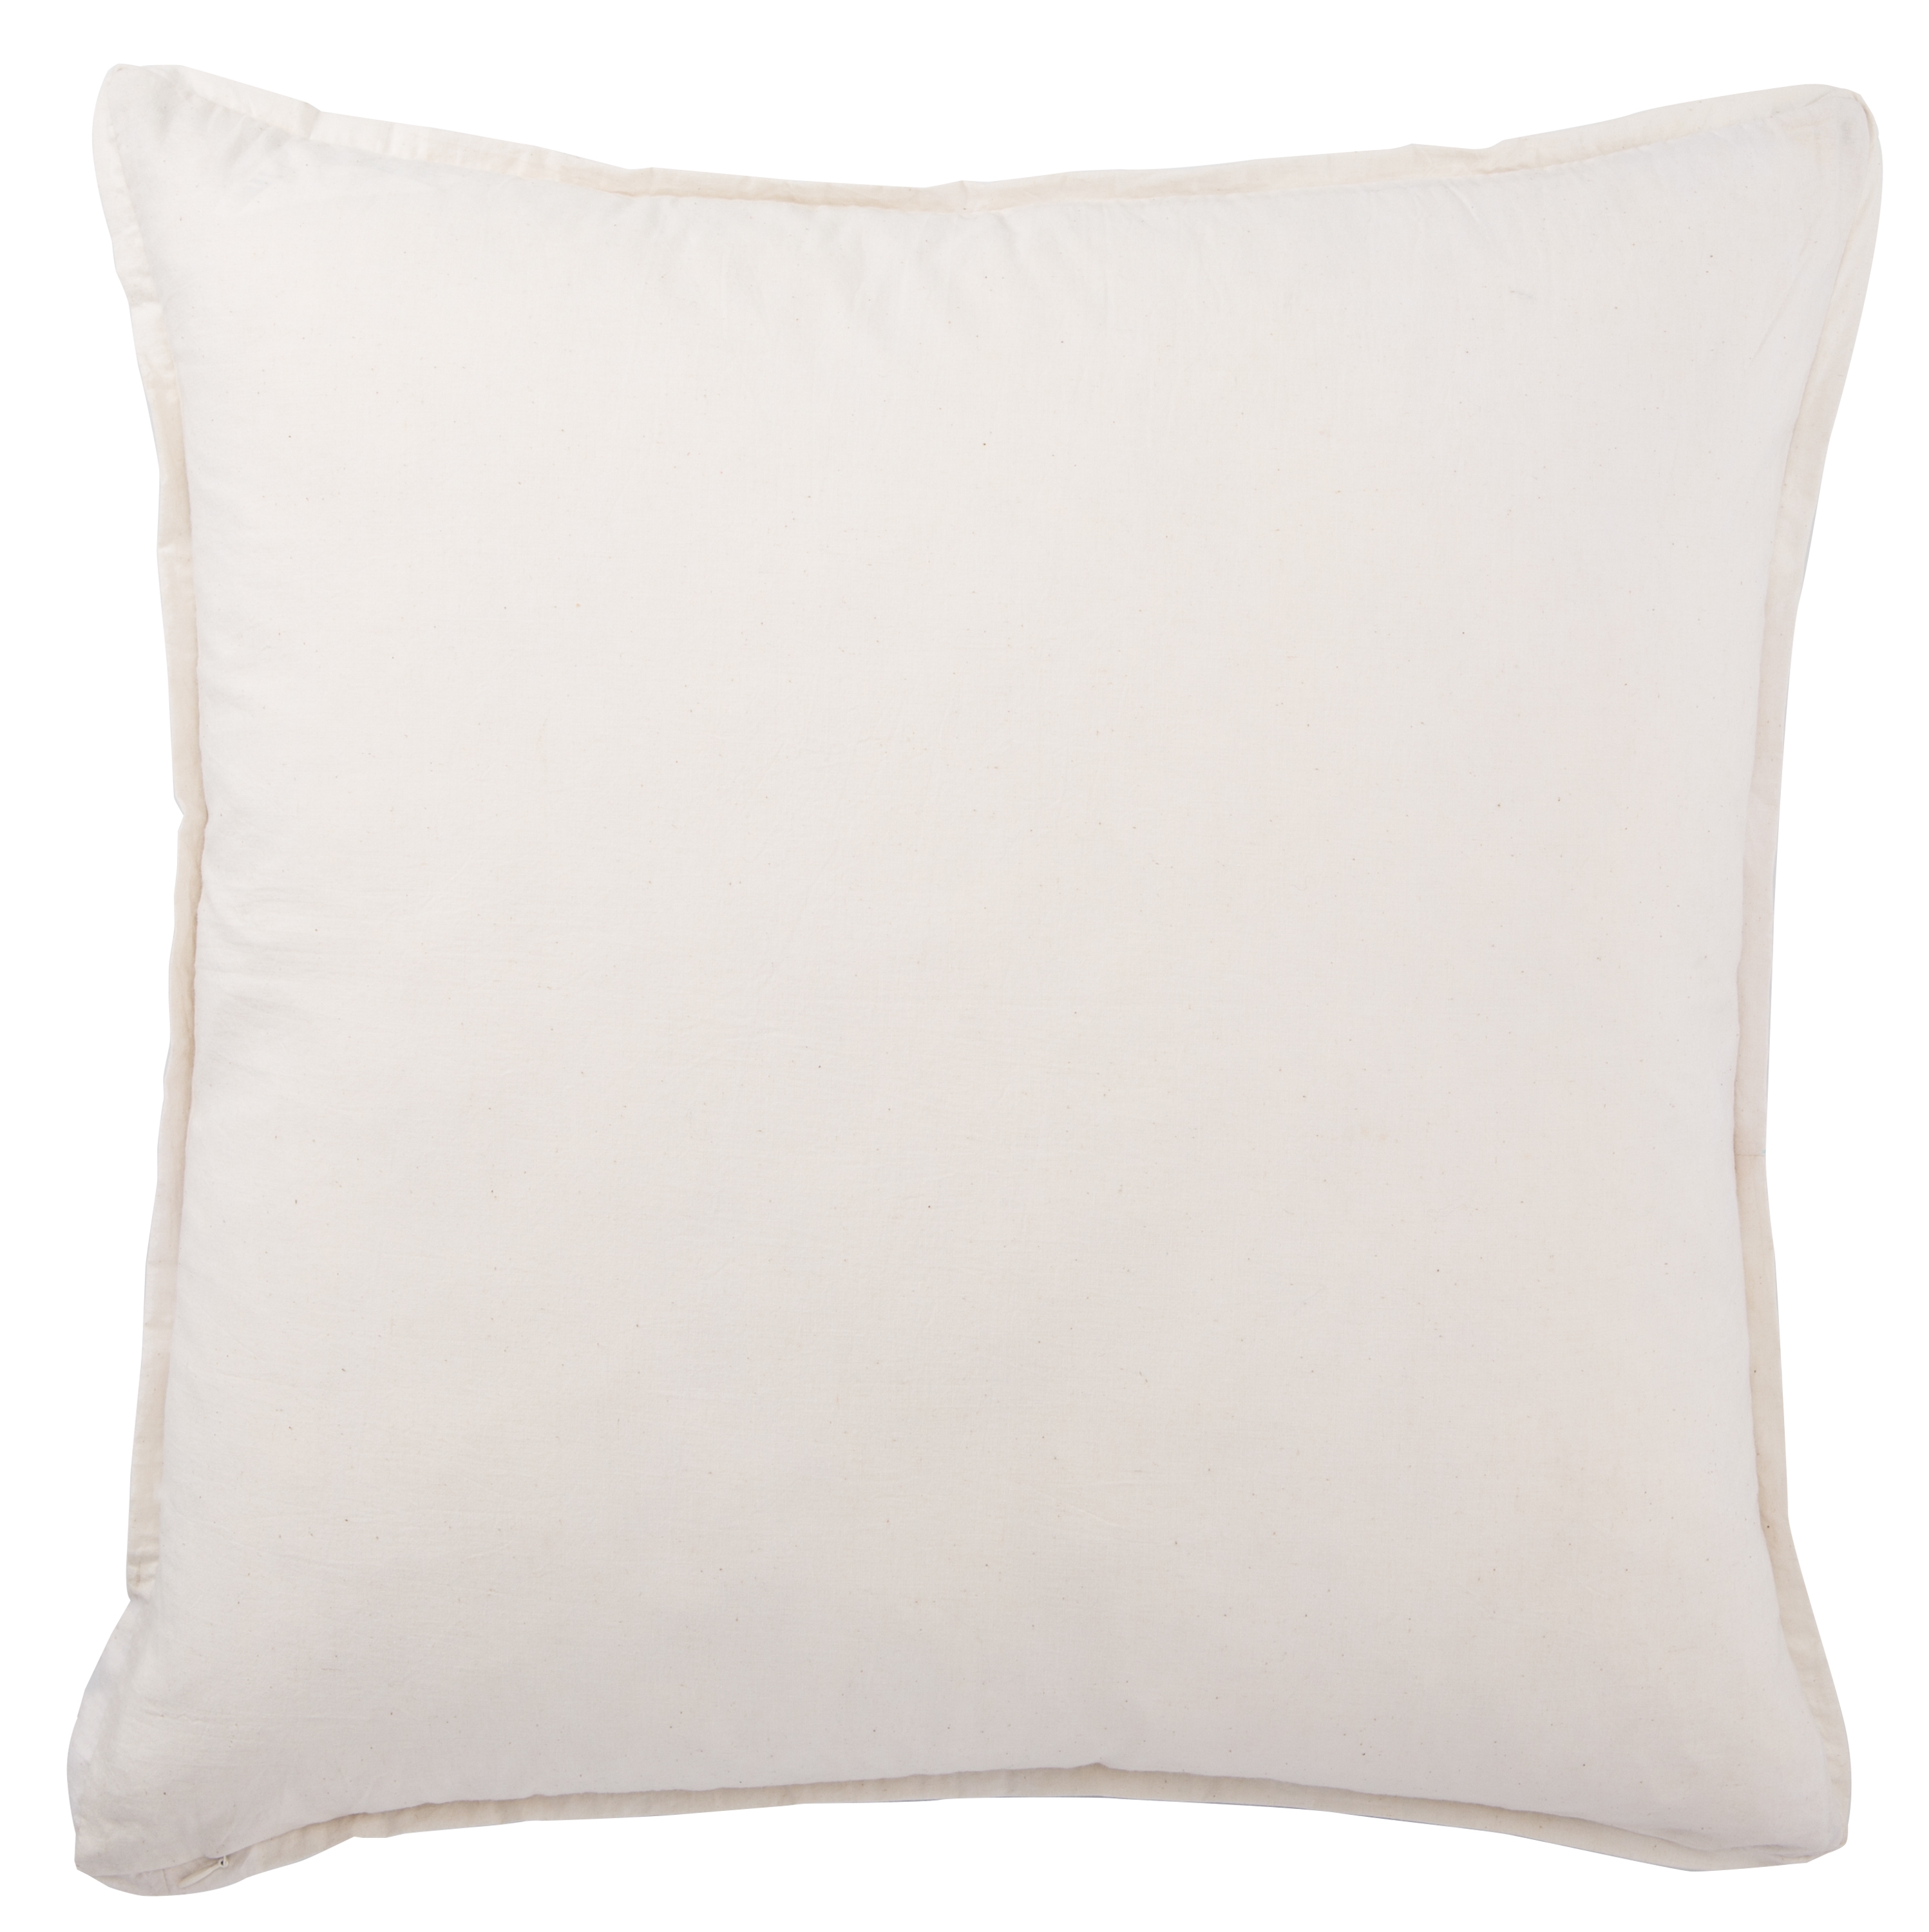 Alicia Pillow - Polyester Insert - Image 1